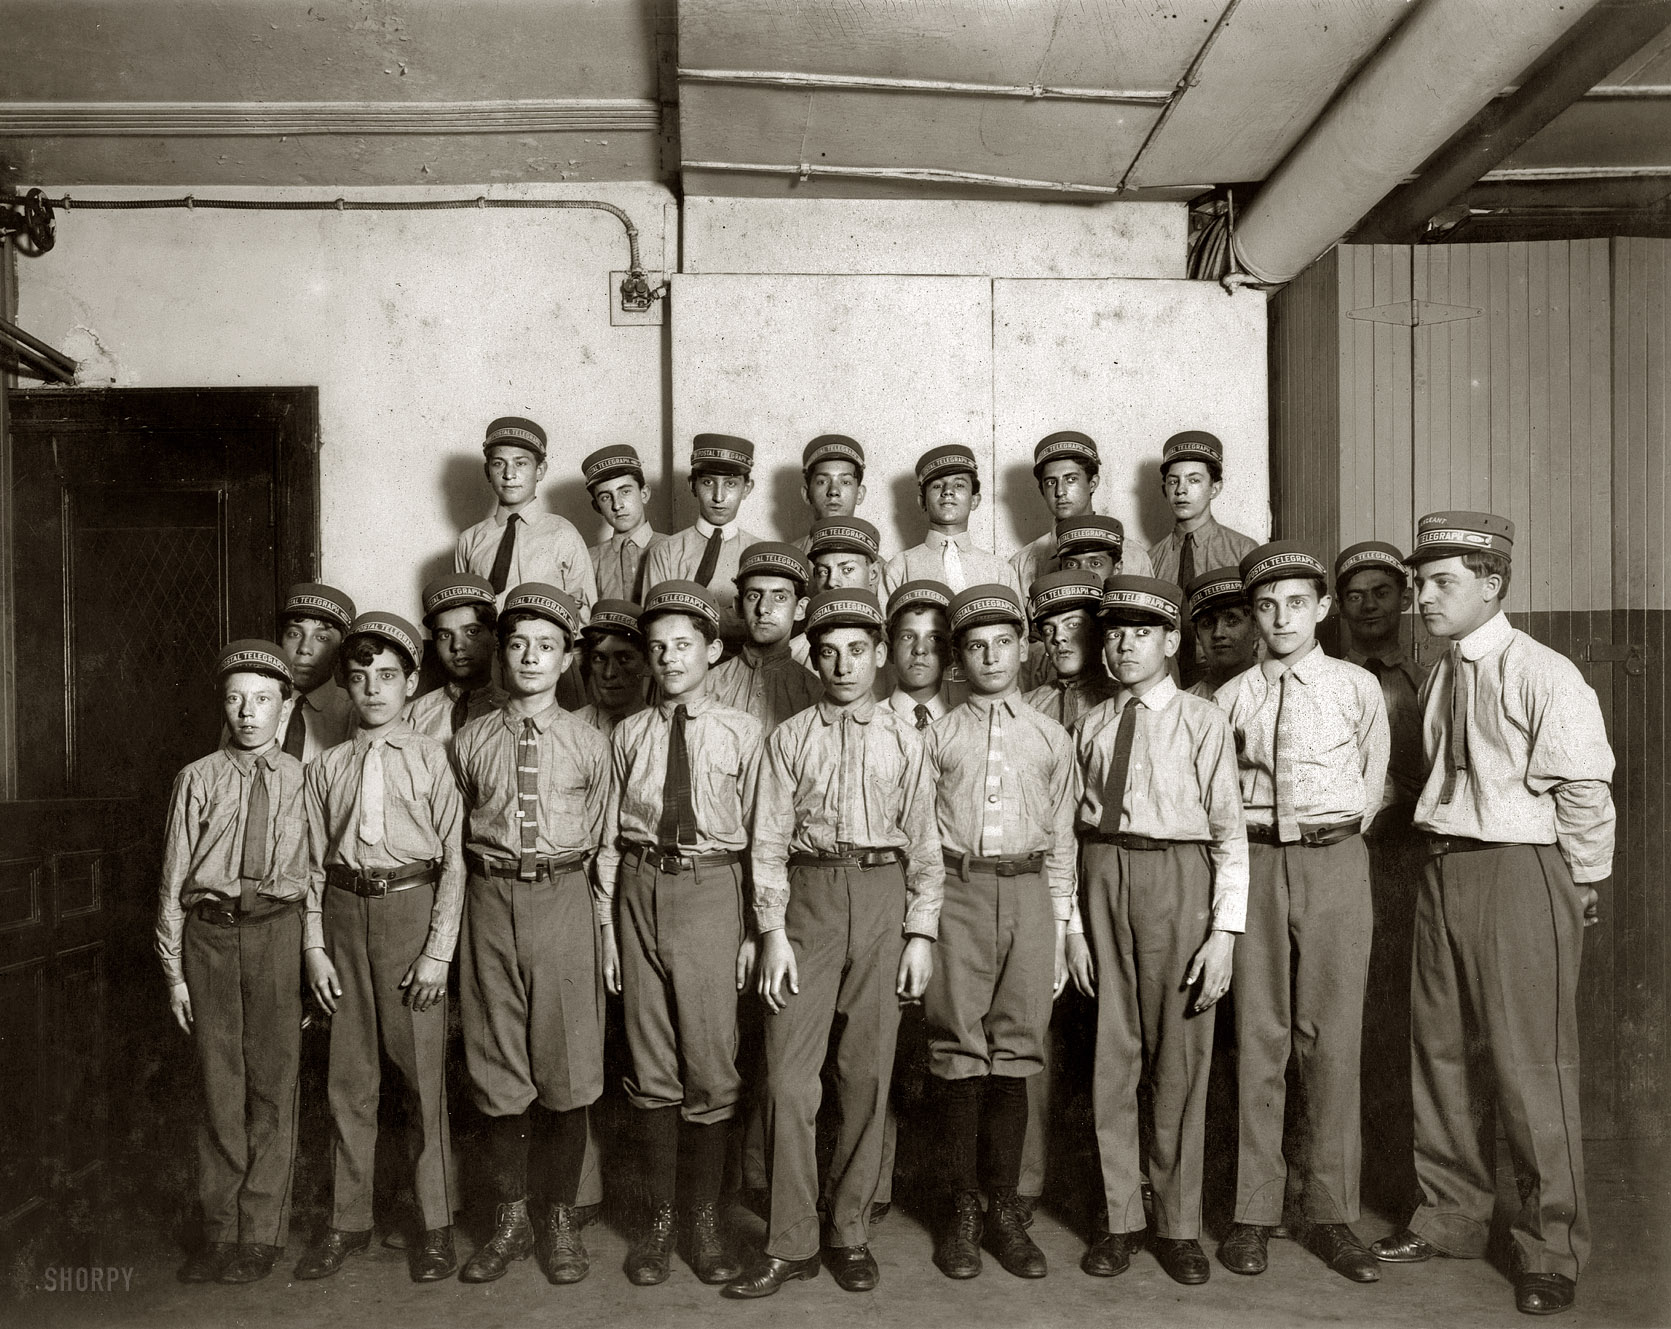 New York, July 1910. "A typical group of messengers at Postal Telegraph Company's main office, 253 Broadway. During hot weather they wear these shirtwaists. (A Suggestion for the other companies.)" Photograph and caption by Lewis Wickes Hine. Library of Congress. View full size.